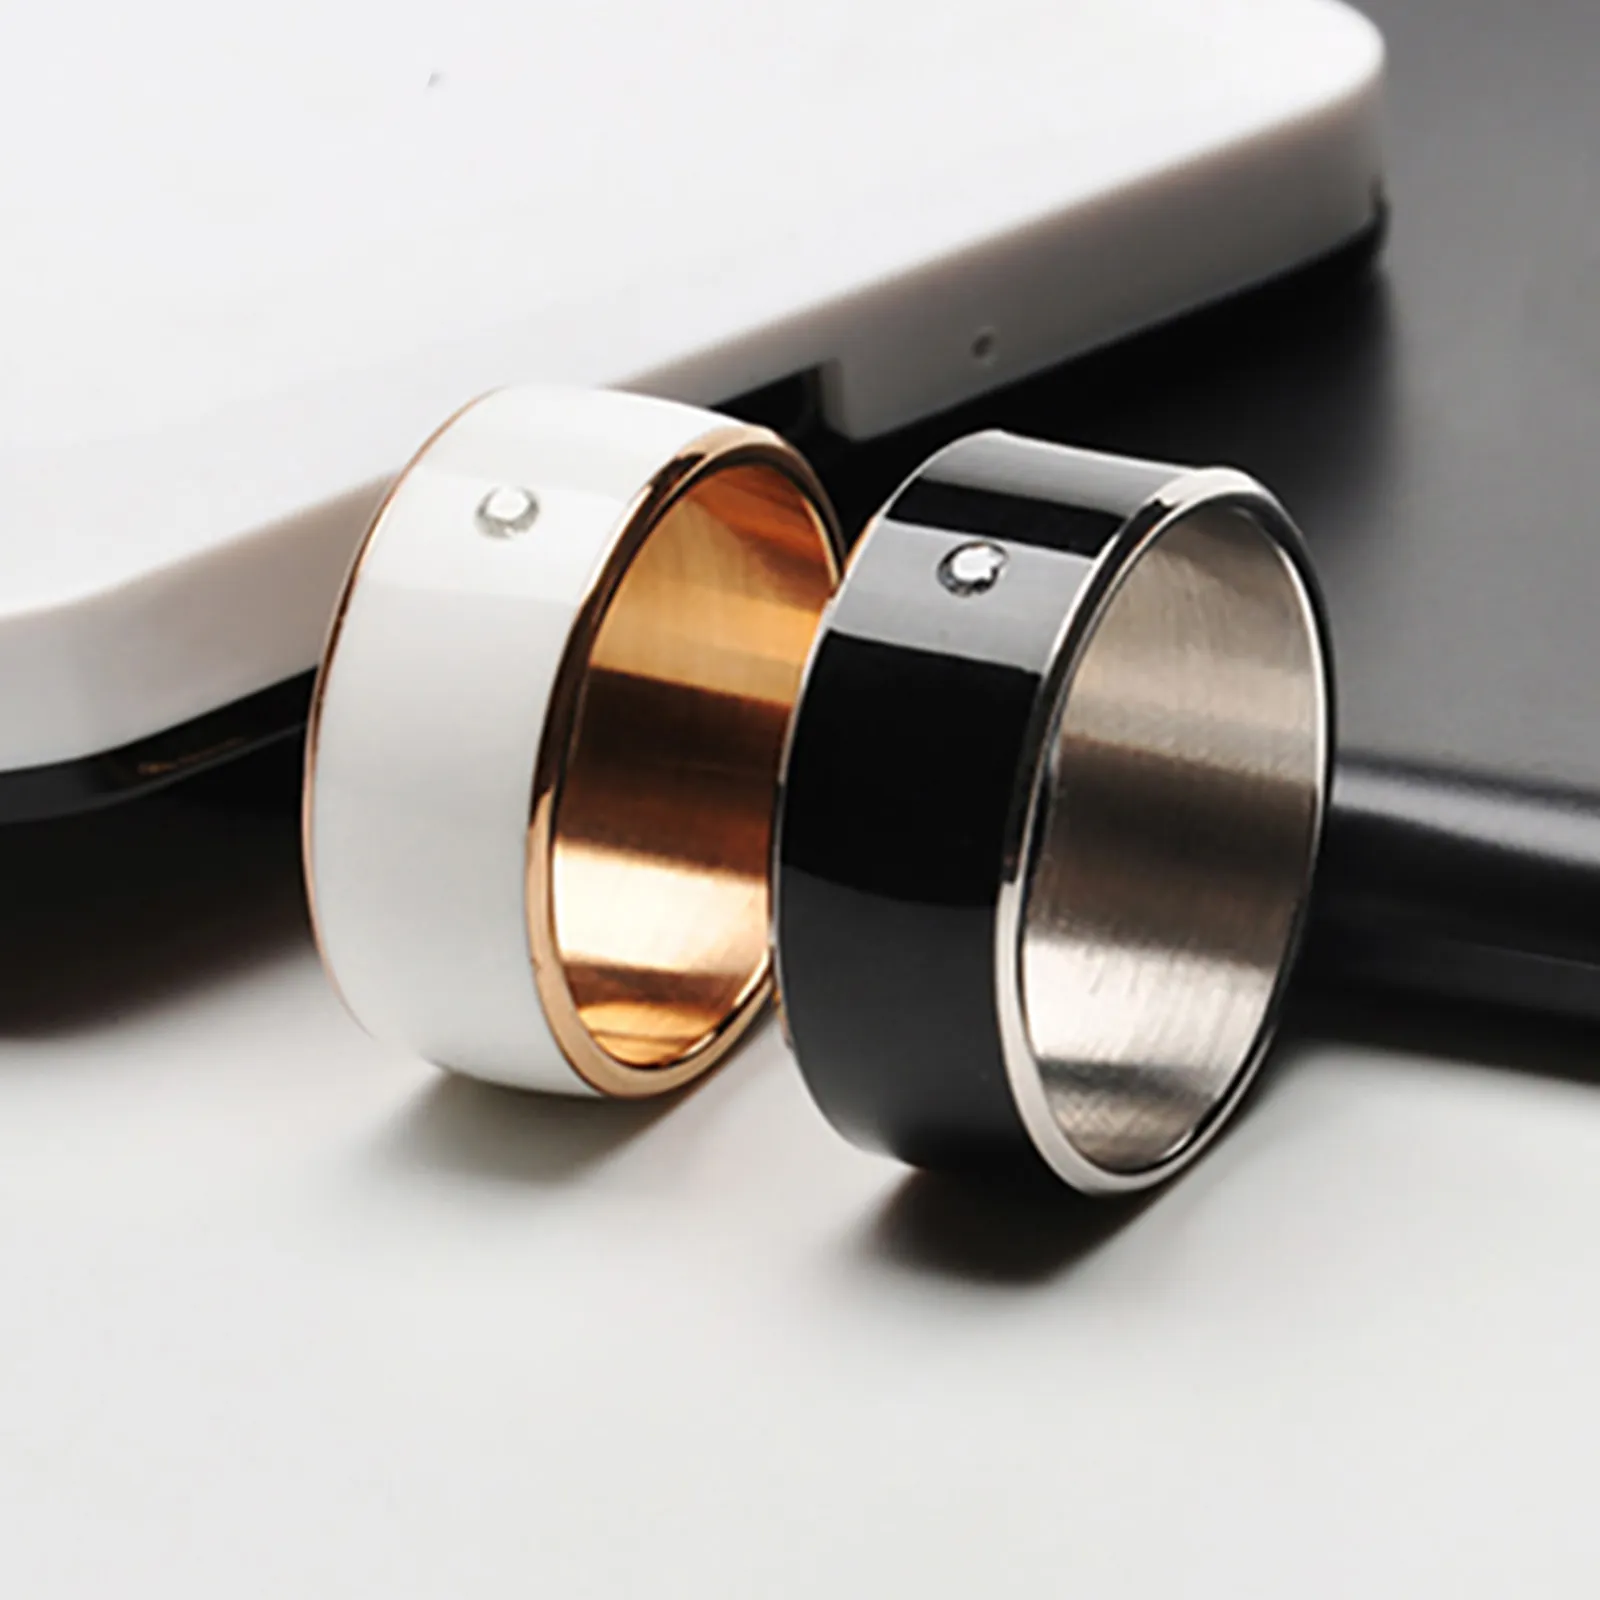 Titanium Smart Ring For Android And PC Waterproof Wearable Wristband With  NFC Technology Comparable To Oband T2 Fit Bit Mi Band From Jakcomdh, $7.94